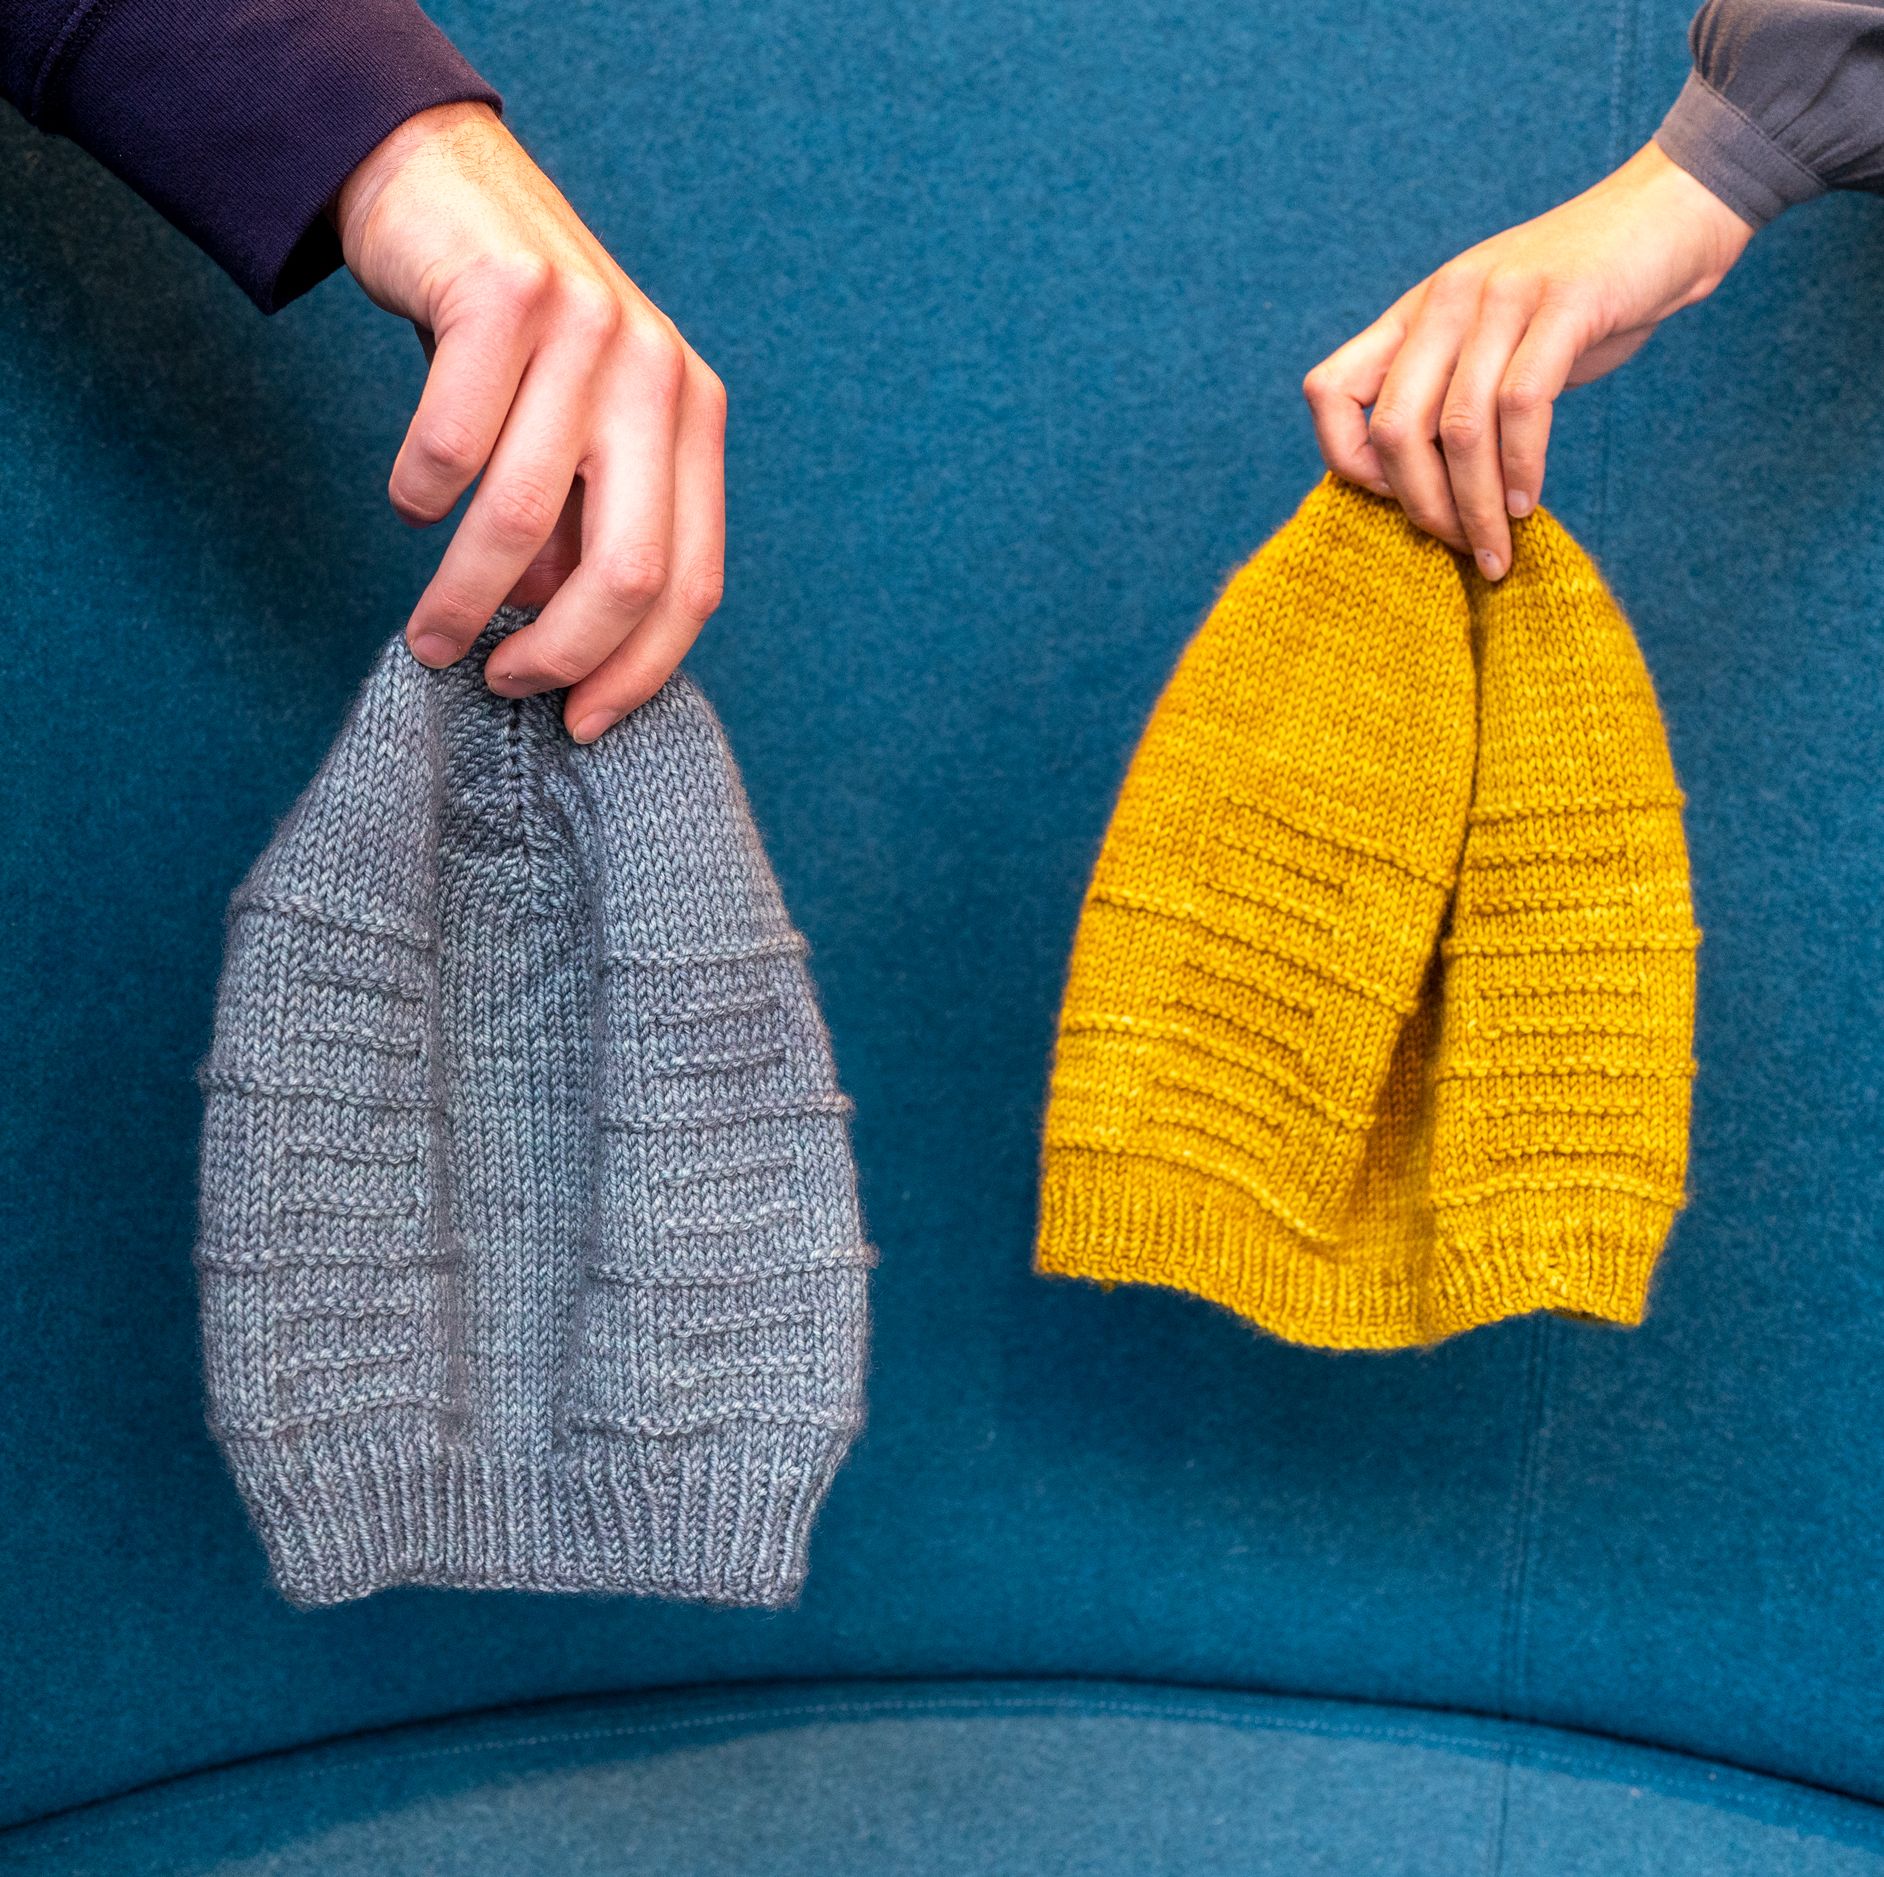 Ready To Learn How to Knit? Follow Our Guide for Beginners and Craft This Cozy, Unisex Hat